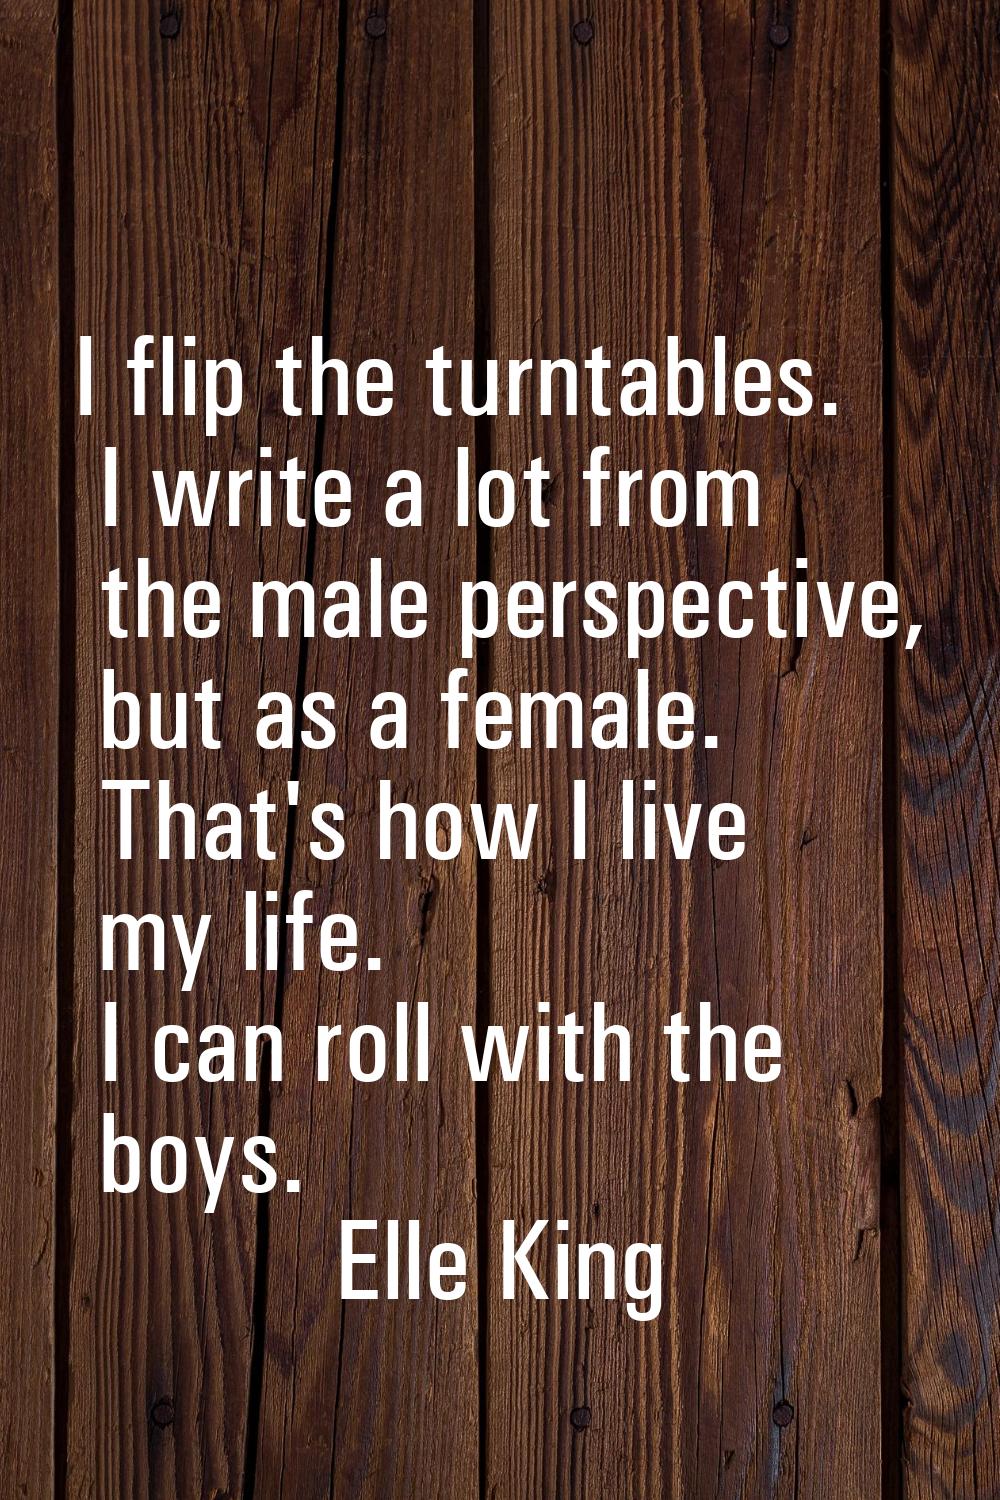 I flip the turntables. I write a lot from the male perspective, but as a female. That's how I live 